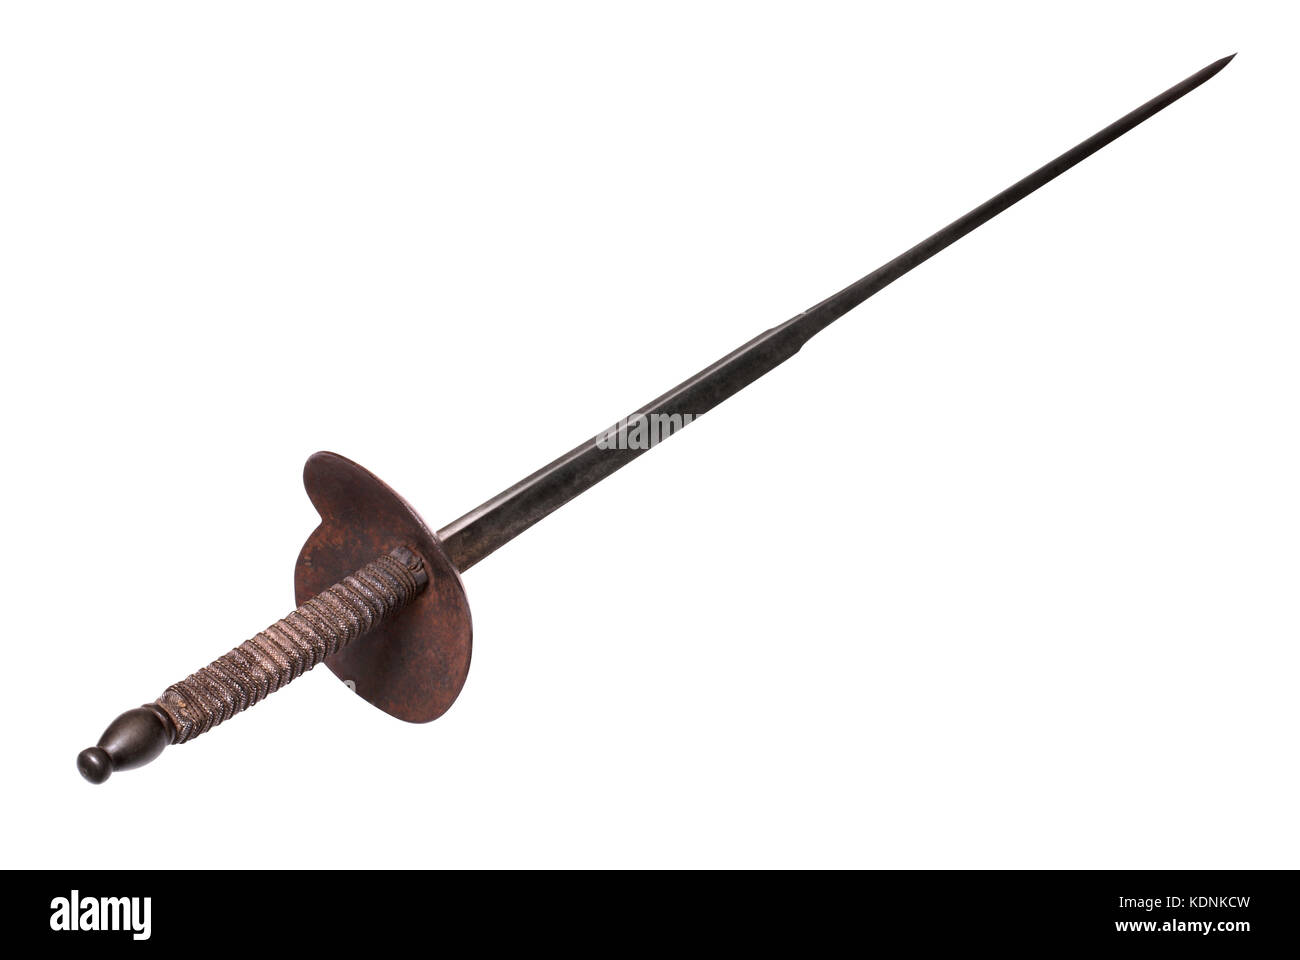 French fencing sword (foil) of 18th century. France. Path on the white background. Stock Photo